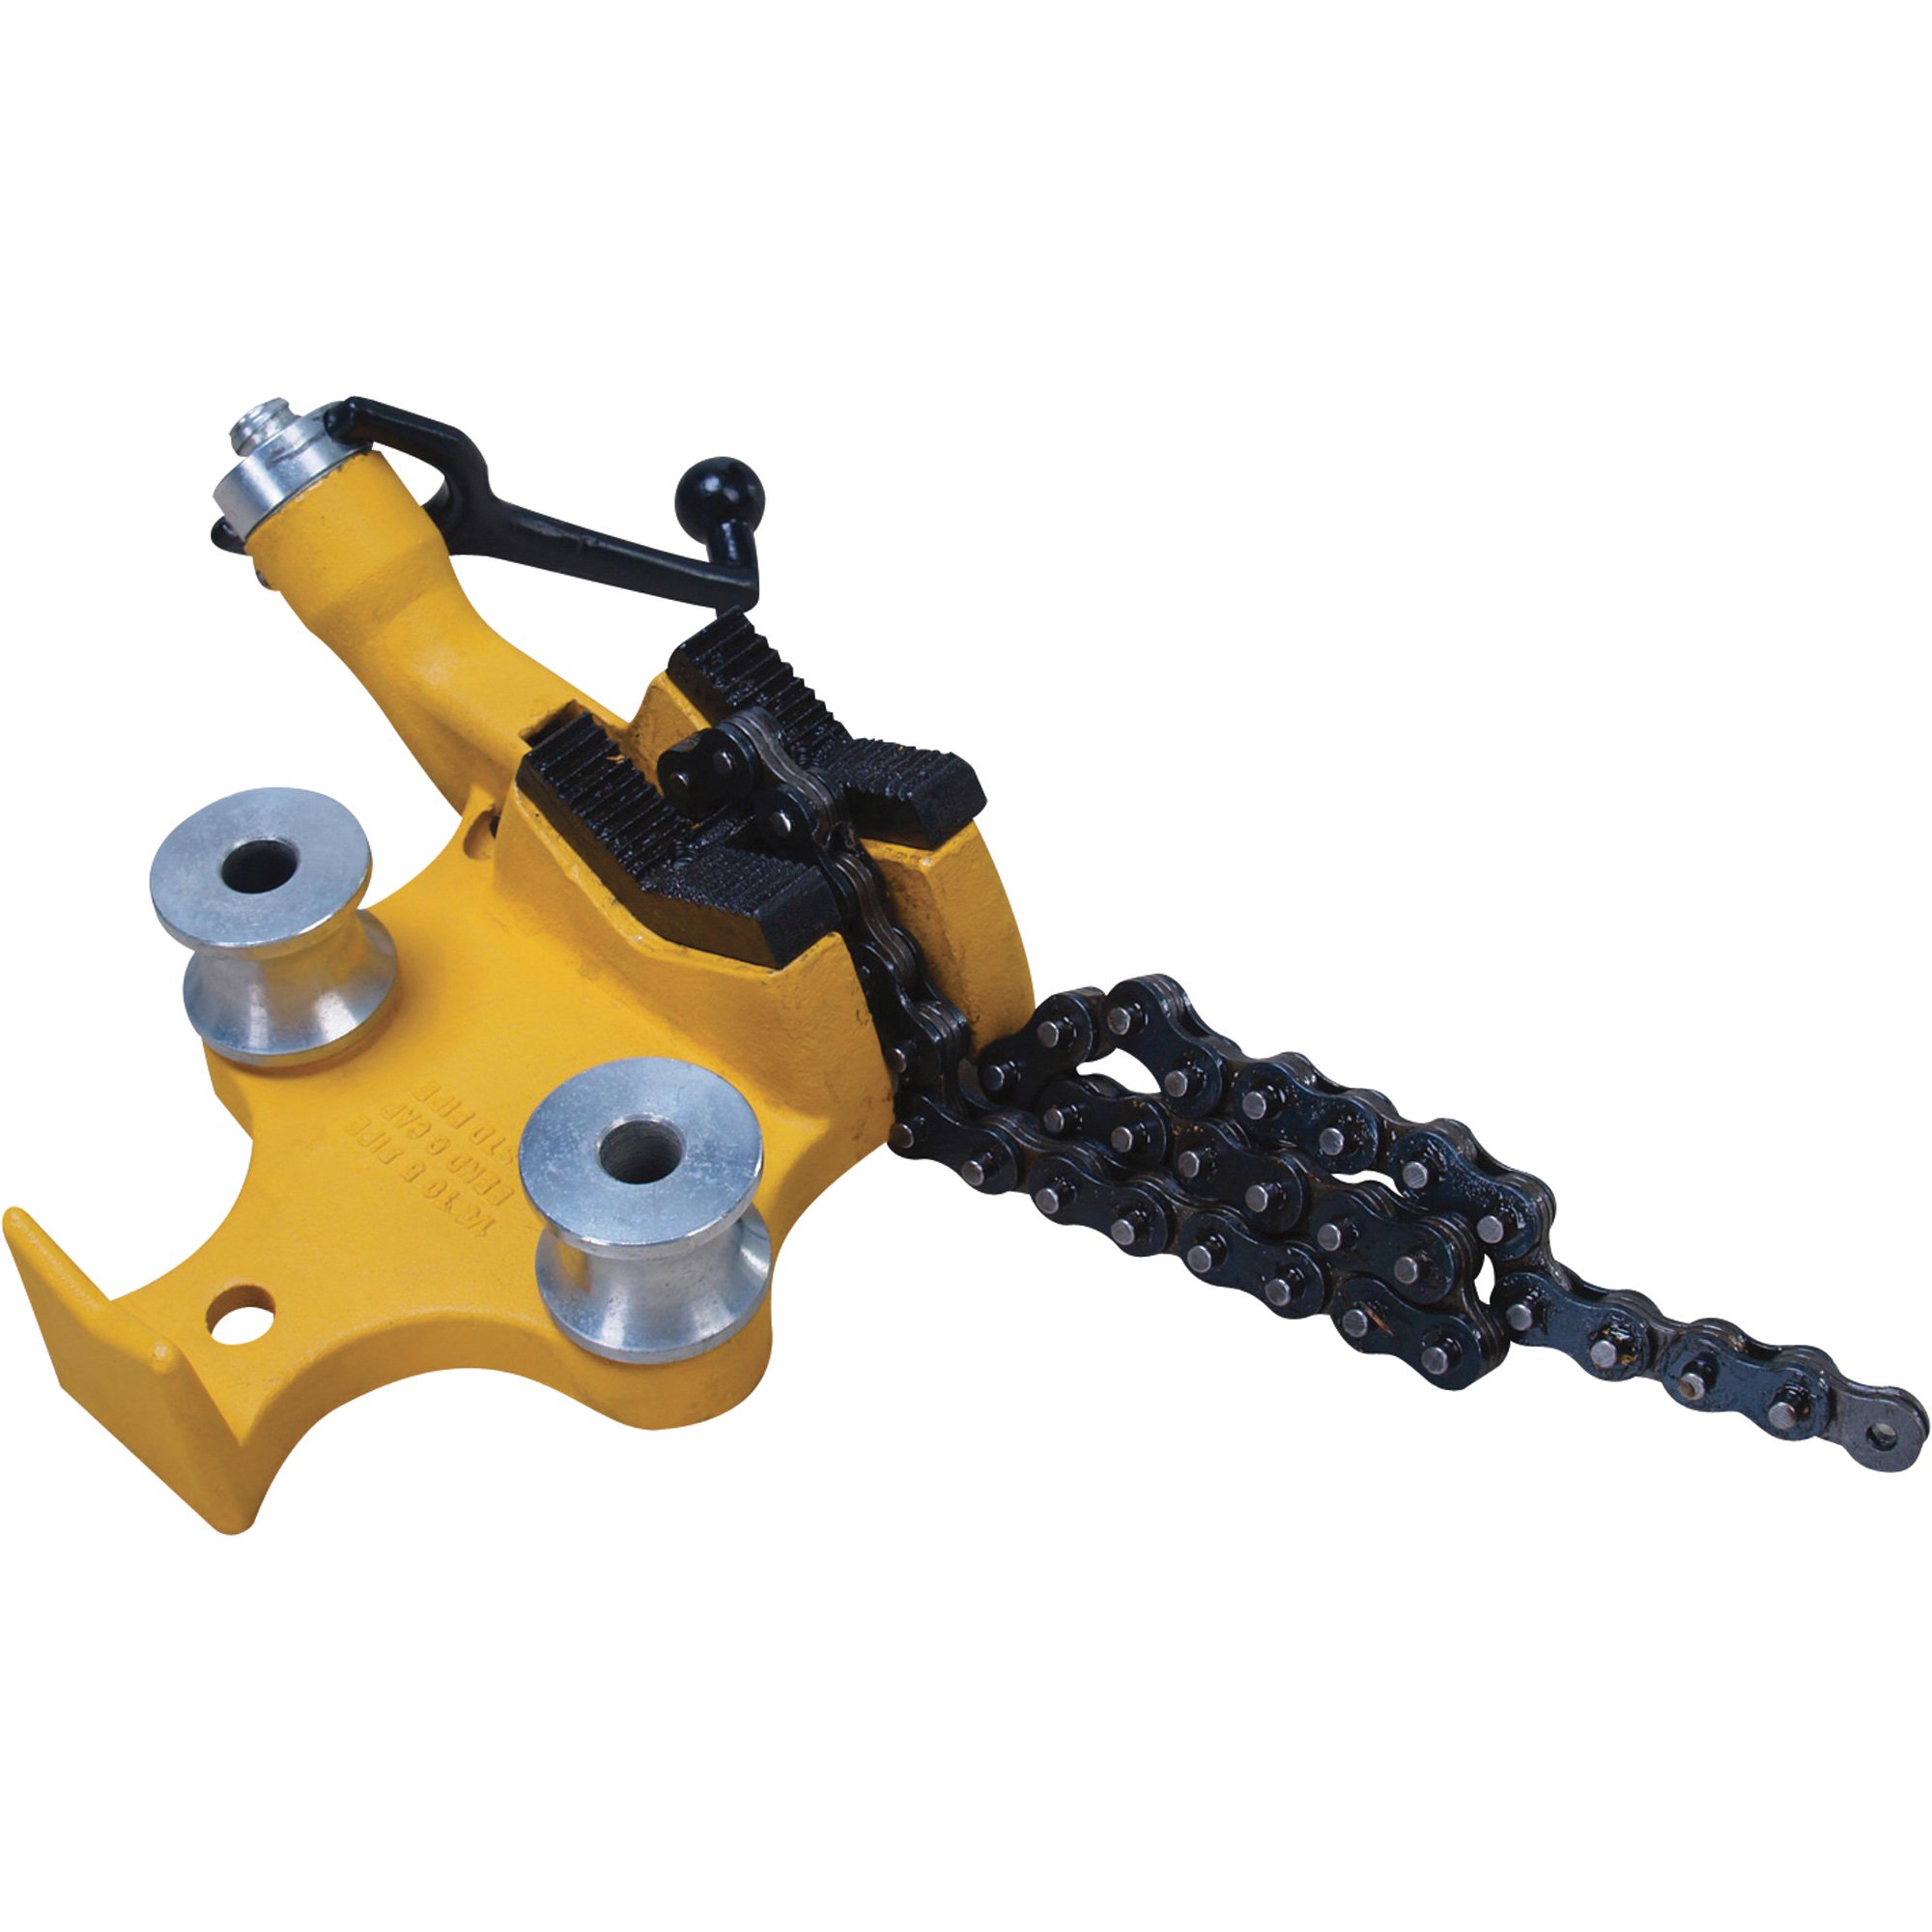 Northern Industrial Tools Bench Chain Pipe Vise | Northern Tool + ...